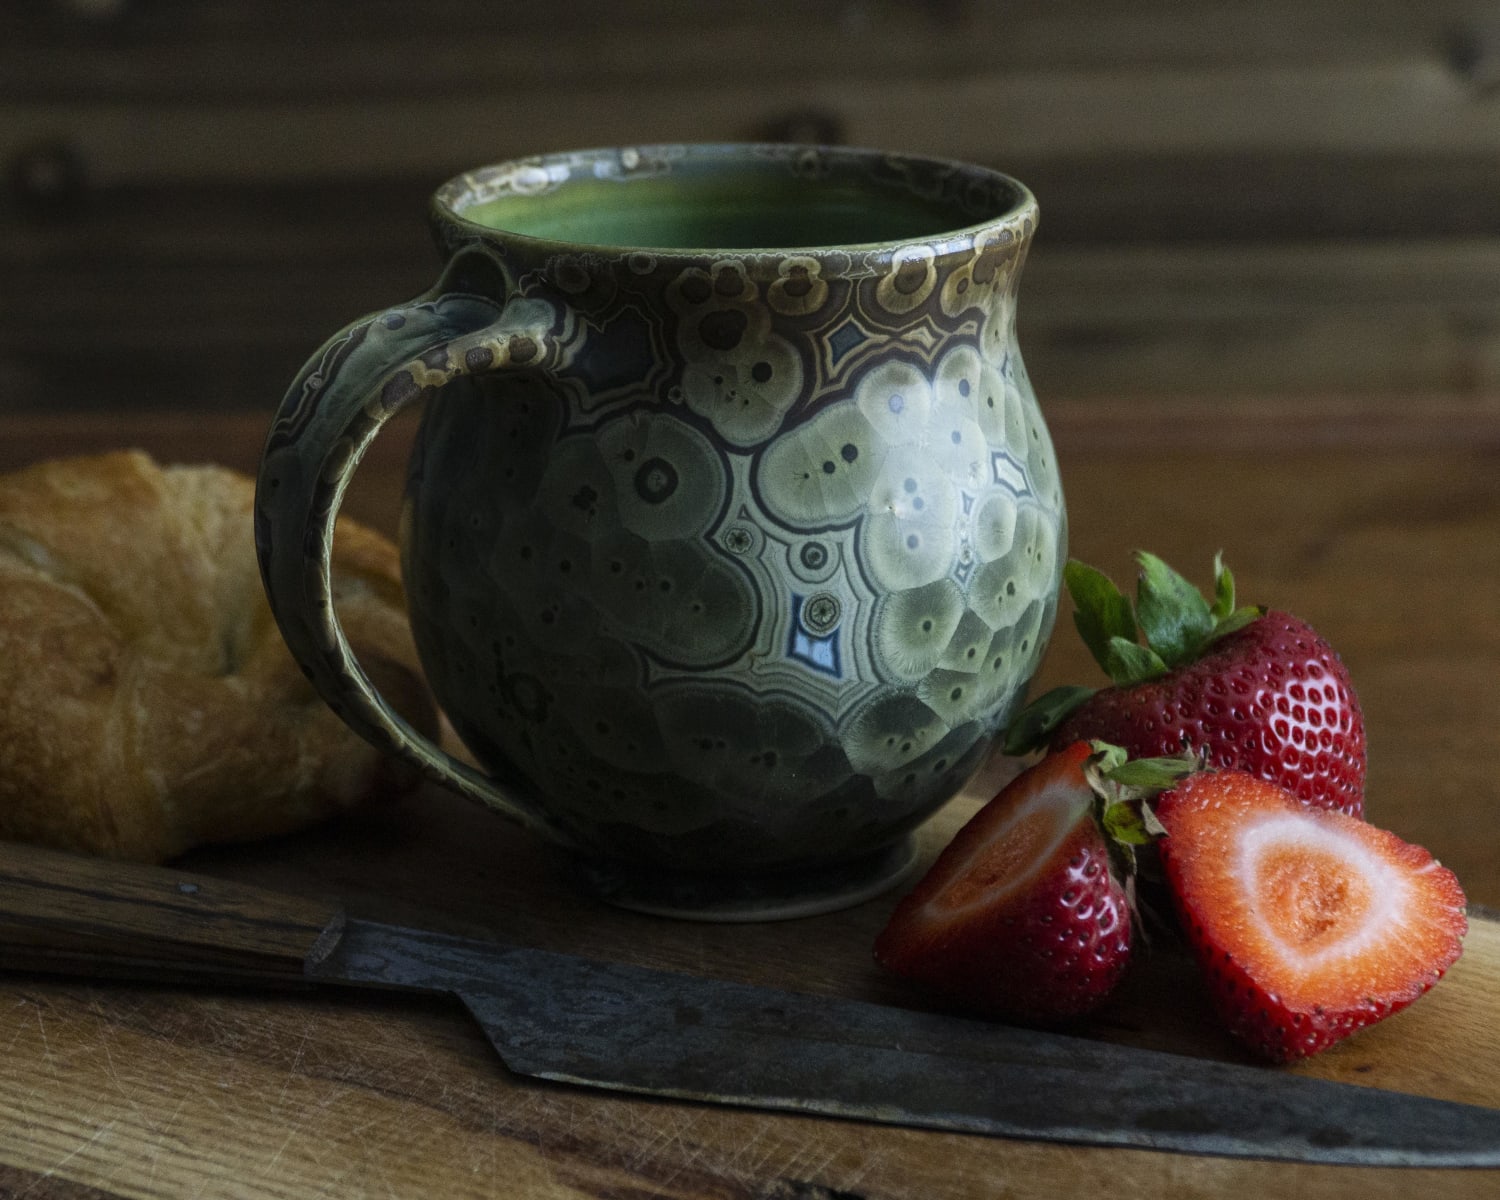 #MugShotMonday and a question. I feel like I did a good job with the lighting and I love how it looks like an old renaissance still life… but that red color pops! Do the strawberries just steal the show?